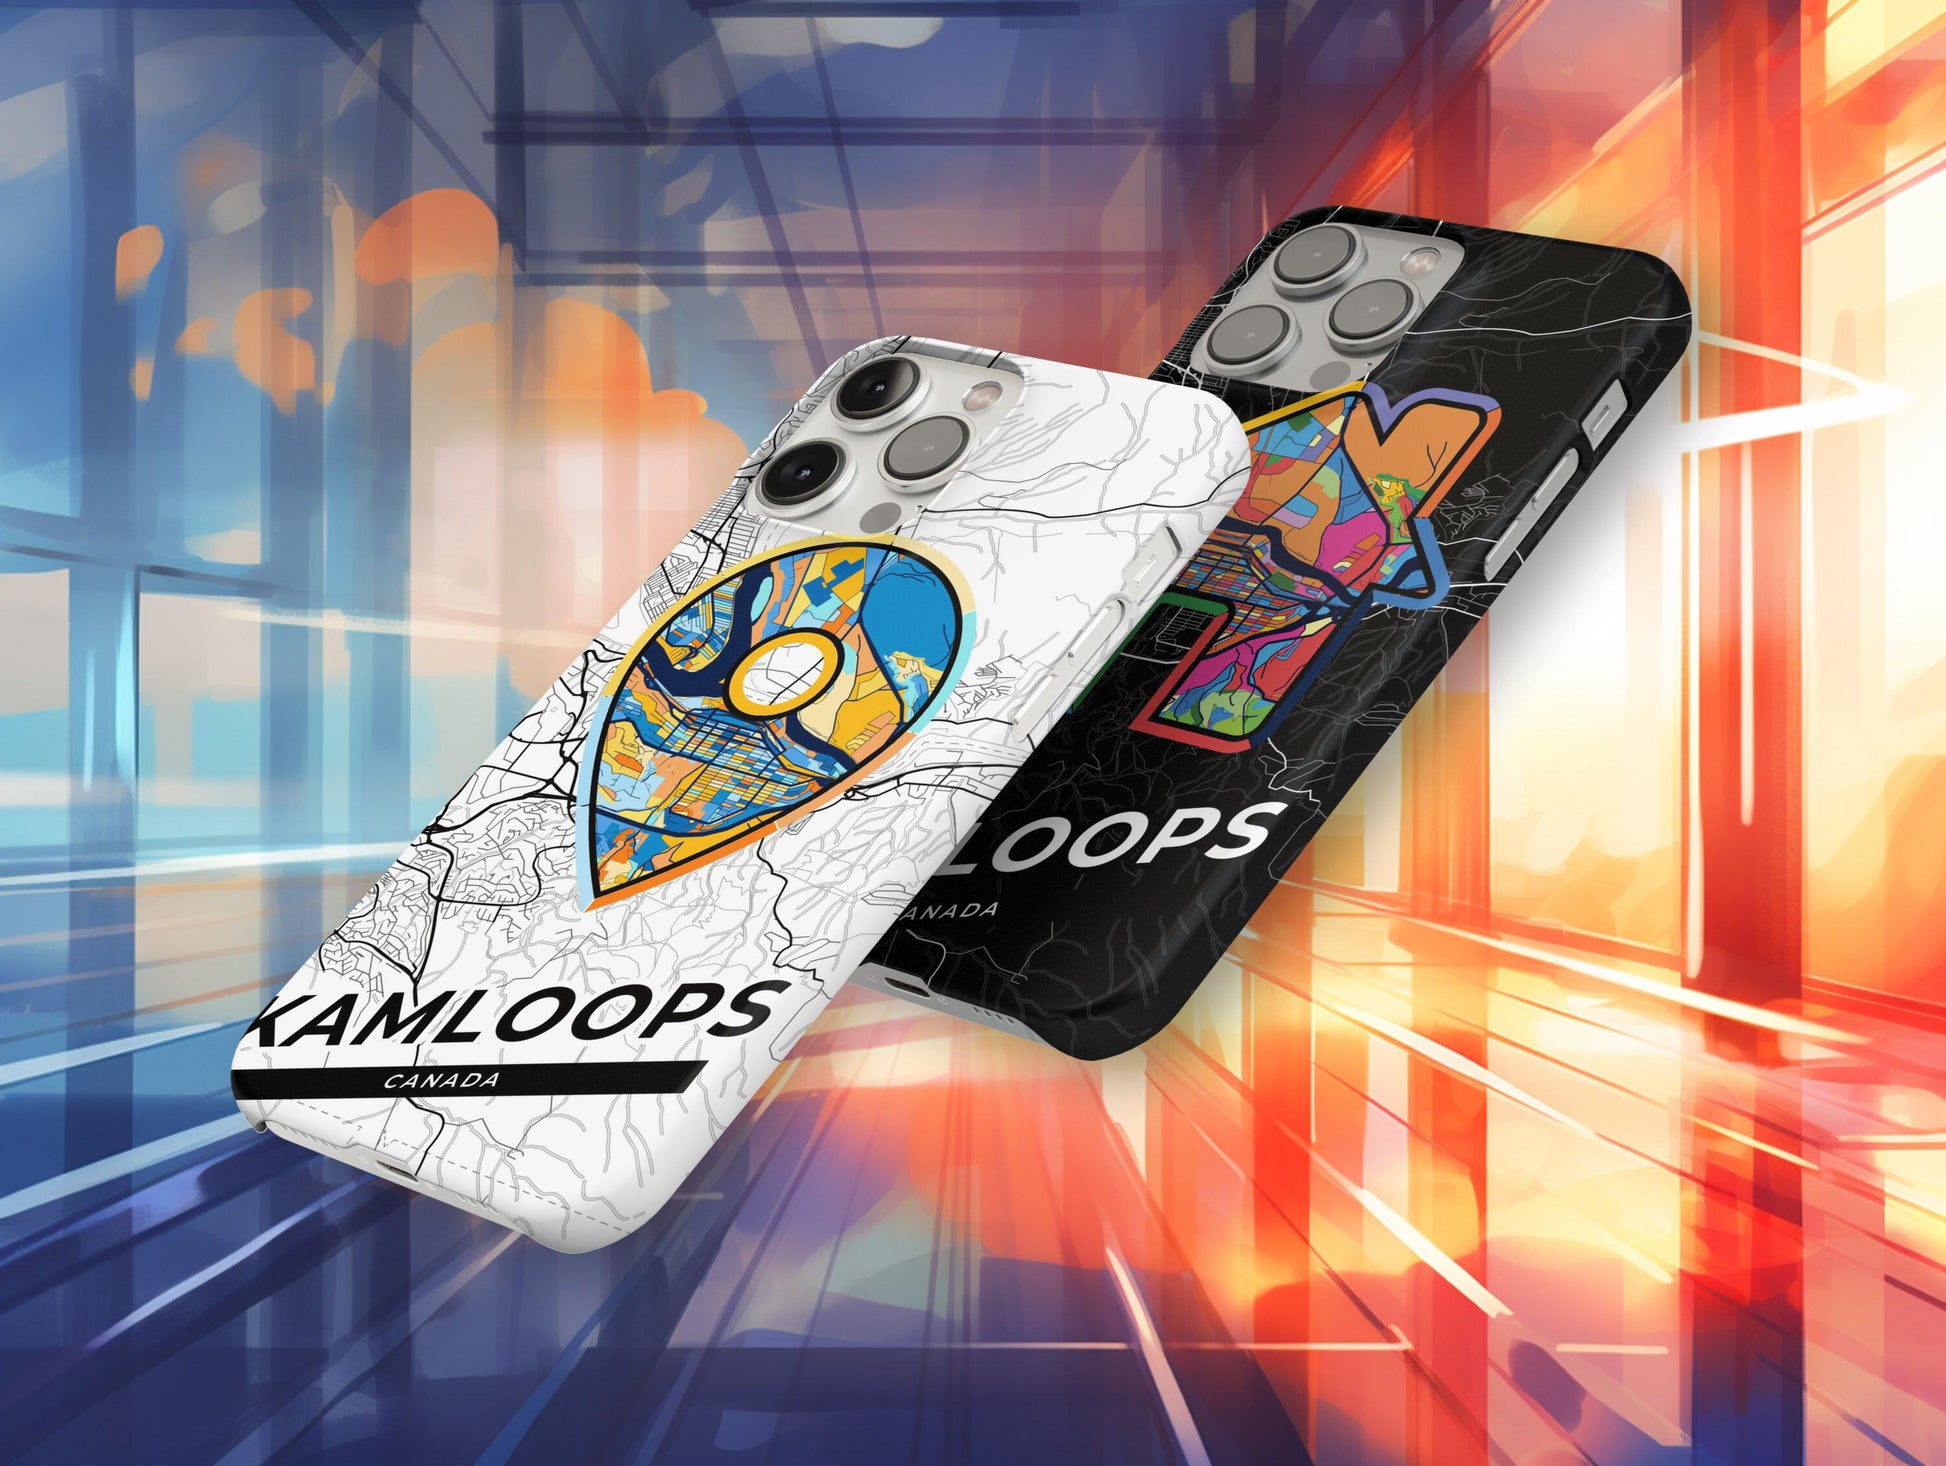 Kamloops Canada slim phone case with colorful icon. Birthday, wedding or housewarming gift. Couple match cases.